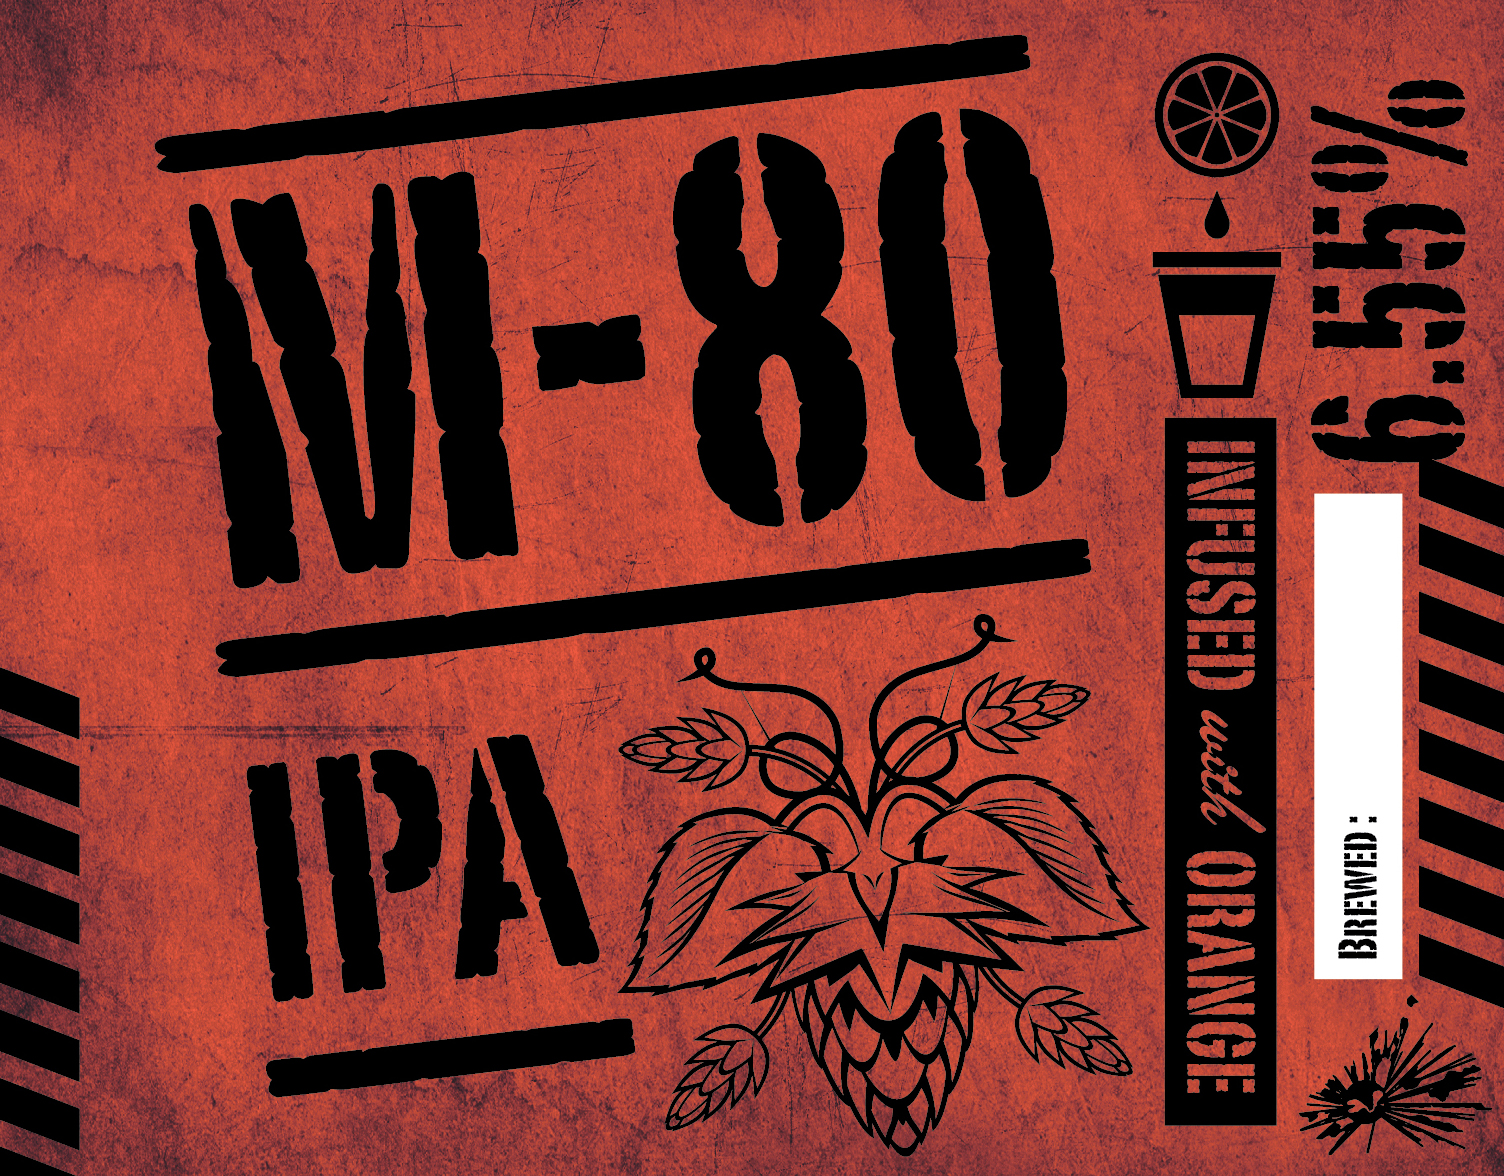 M-80 IPA - All Grain (Milled)